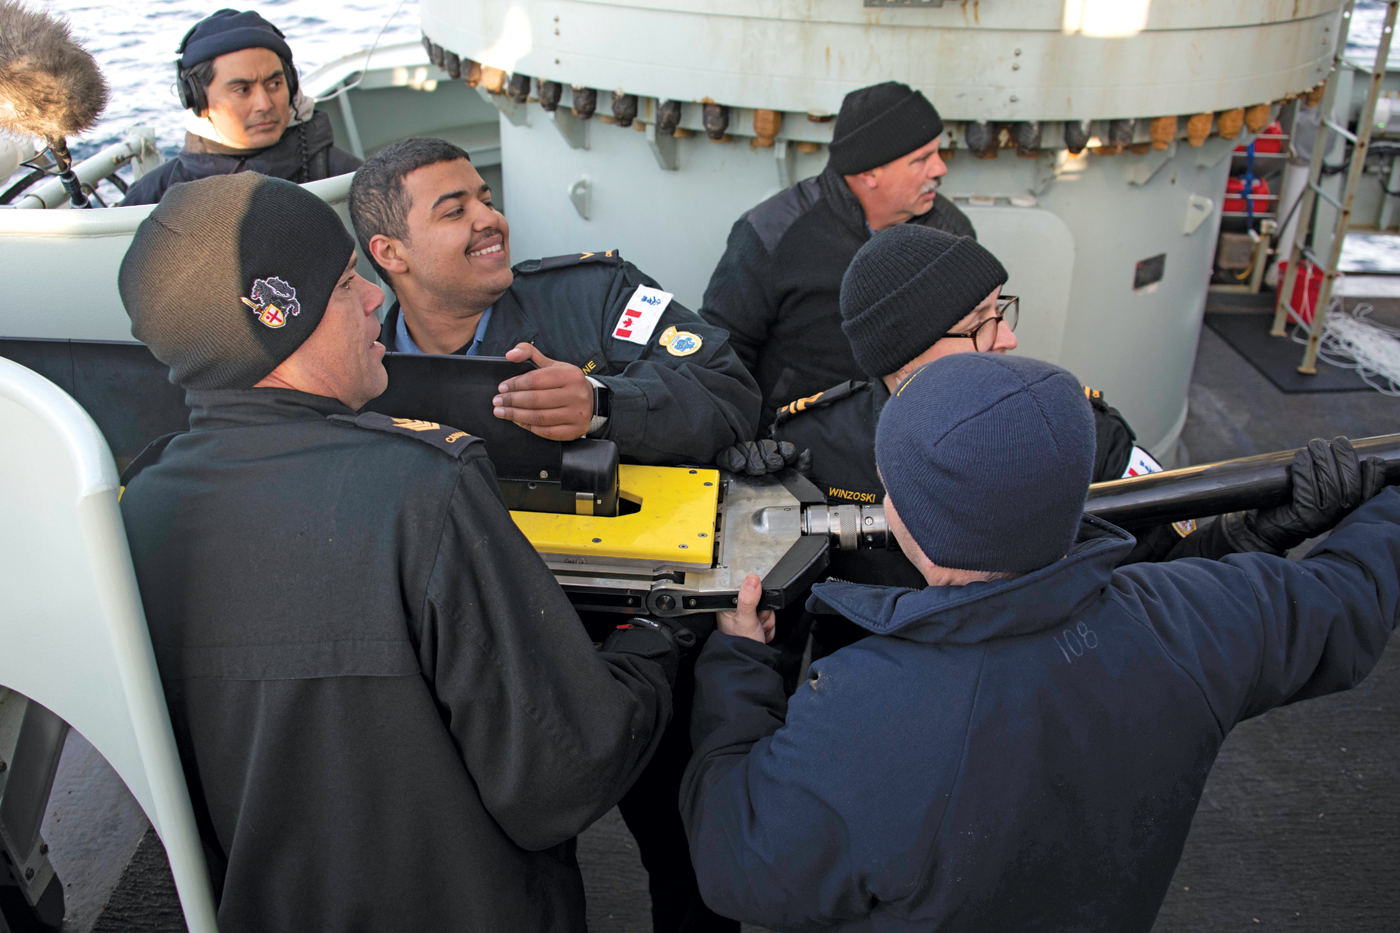 HMCS Harry DeWolf crew members help launch Defence Research and Development Canada’s new Towed Reelable Active-Passive Sonar, which was tested during the ship’s passage through Northern waters earlier this fall. Photo by Corporal Simon Arcand, Canadian Armed Forces Photo